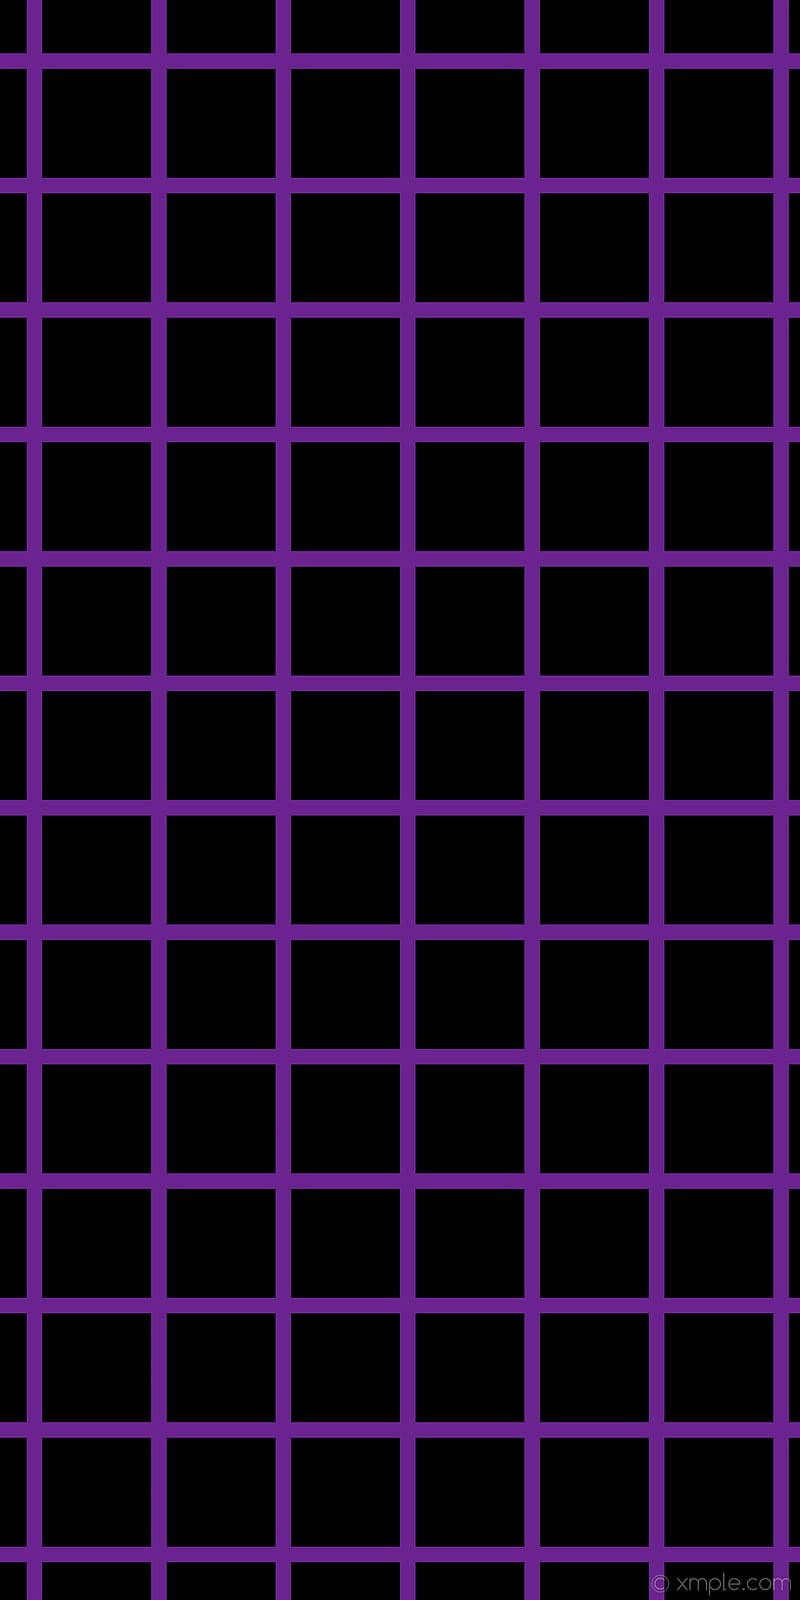 Thick Pink Lines With Black Grid Aesthetic Picture